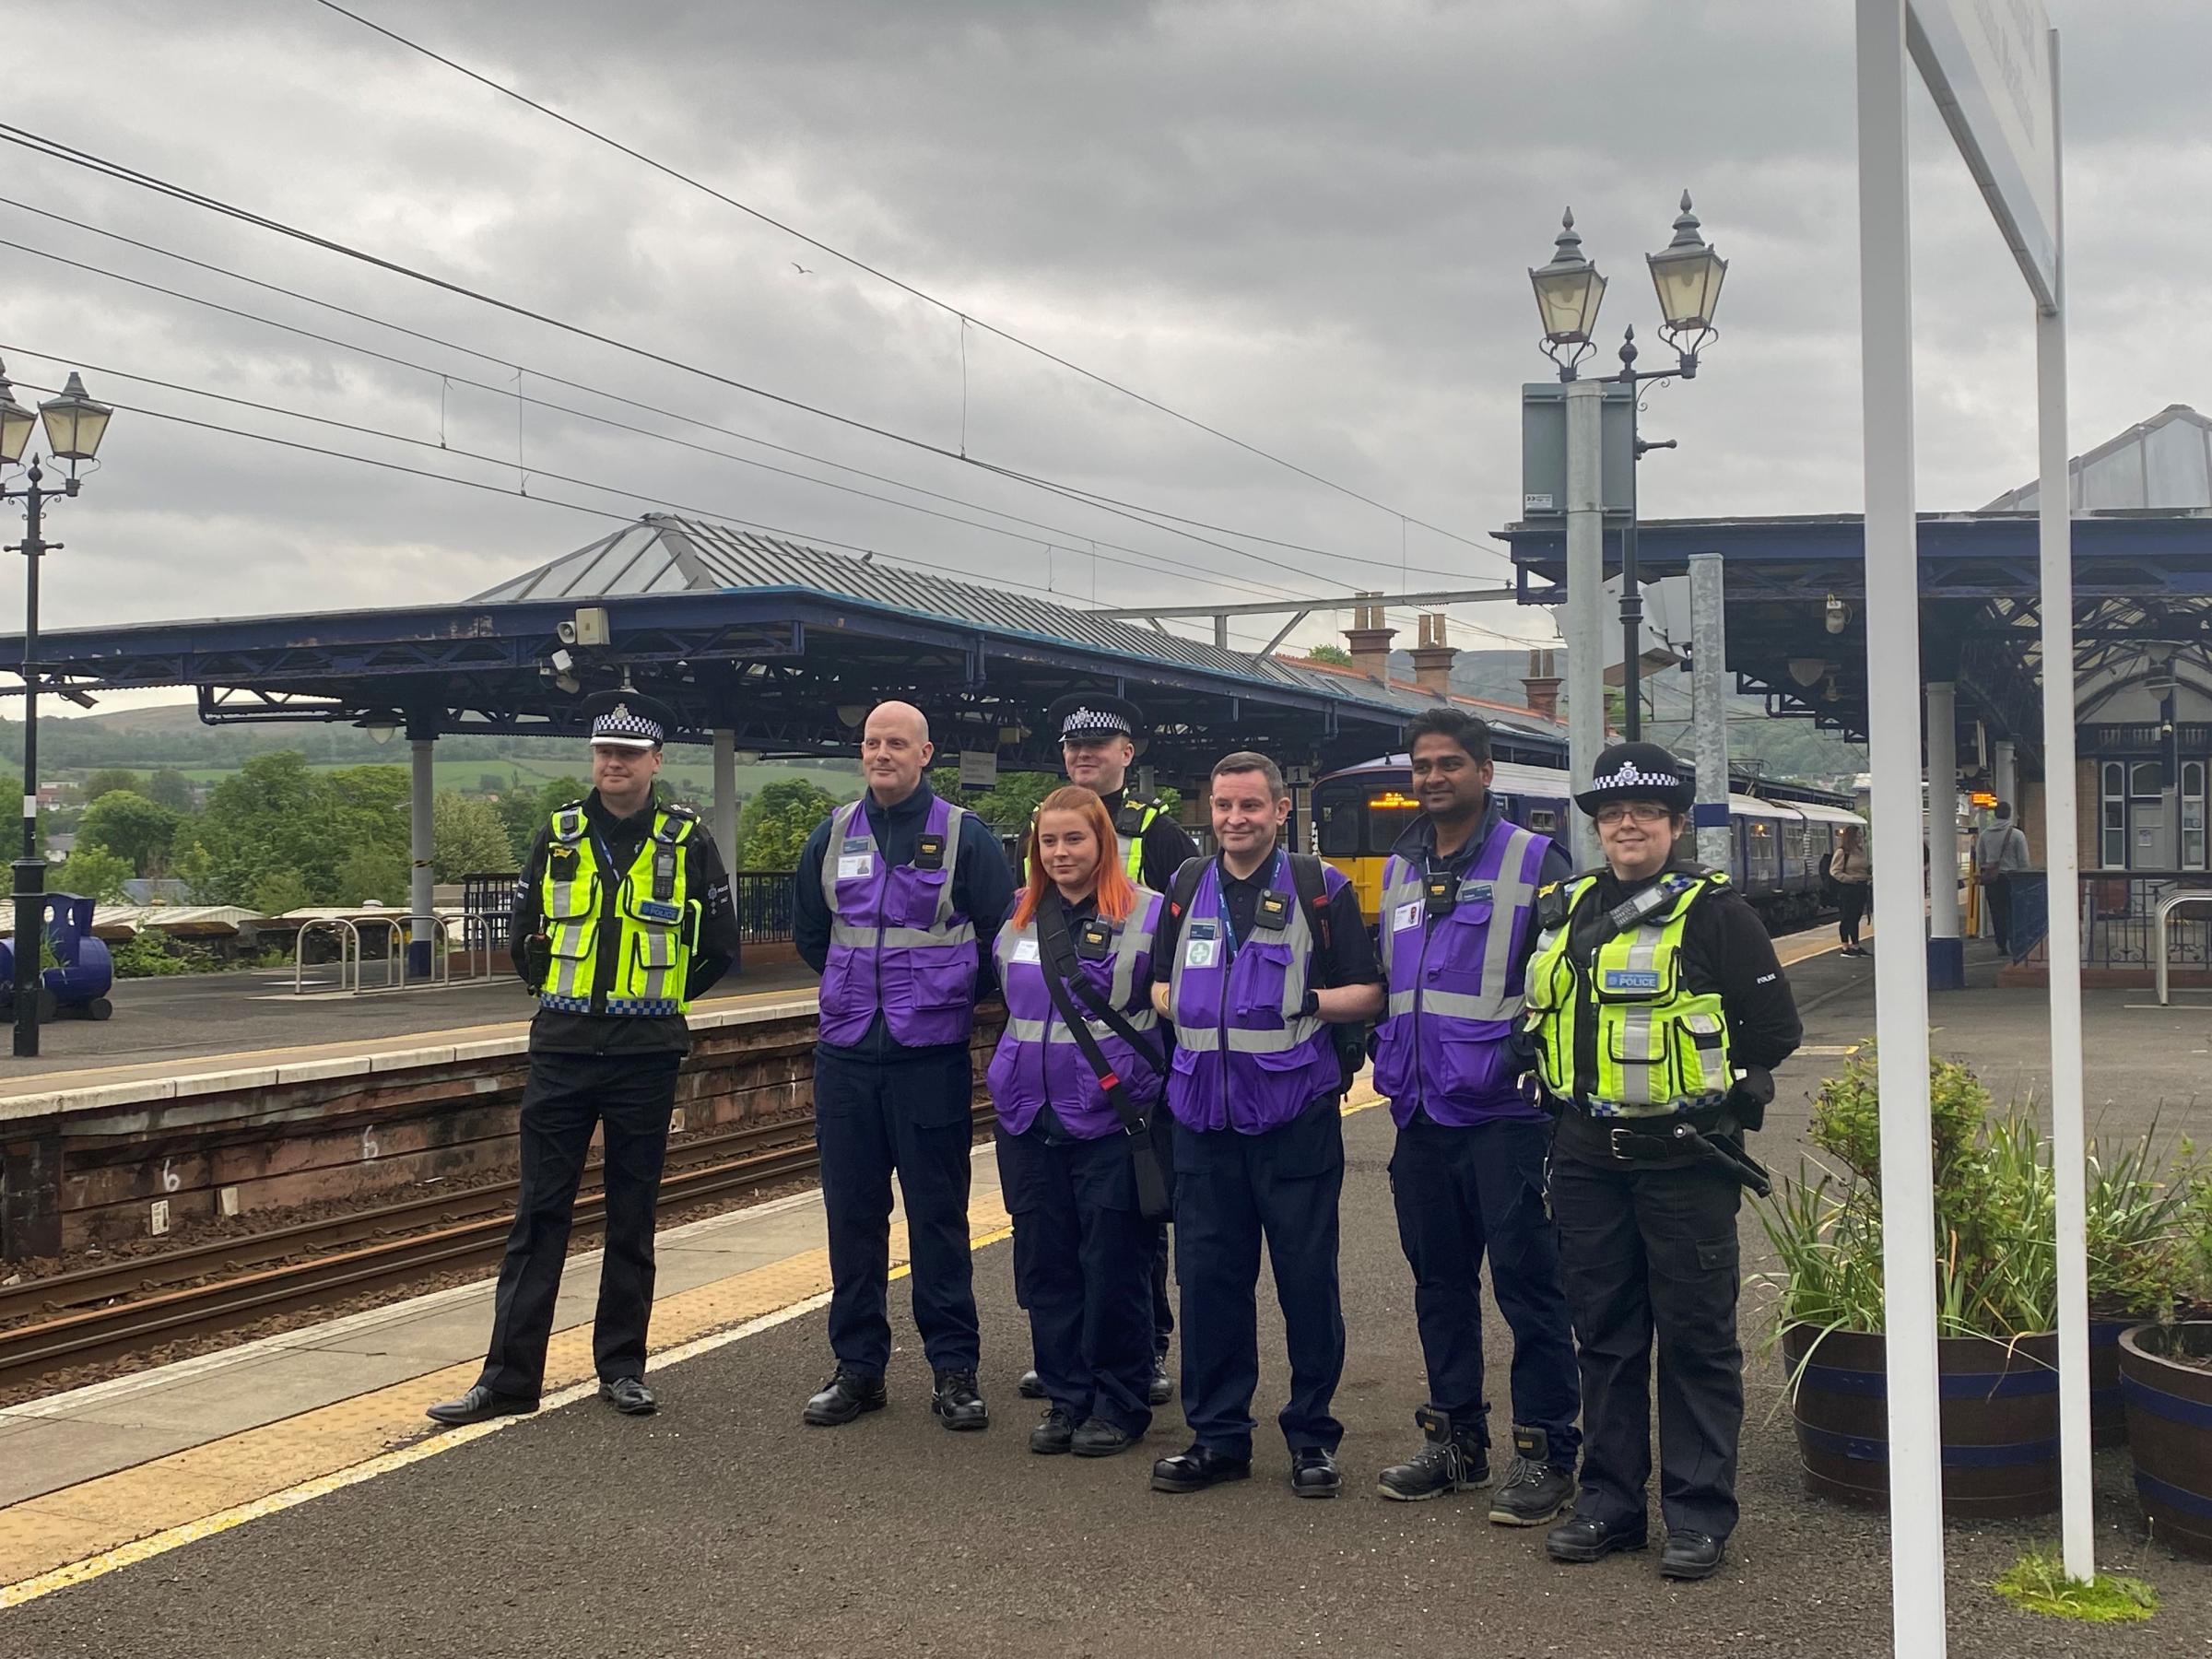 Scotrail: Balloch to Dalmuir train route is focus of new partnership with police